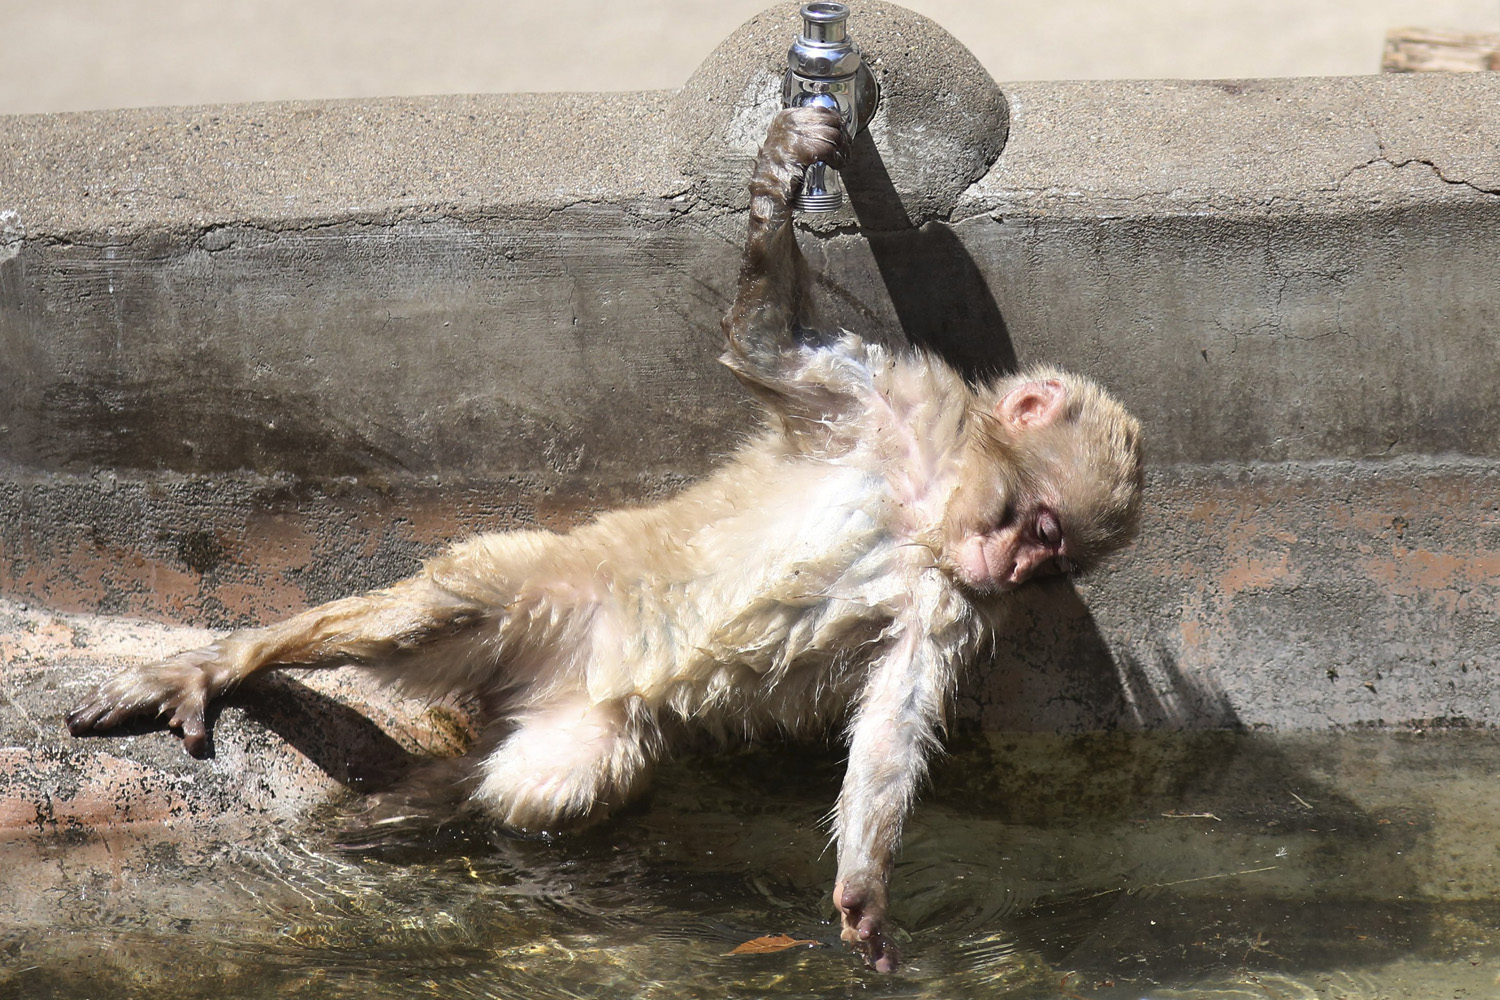 A young Japanese macaque tries to reach water at a pound in warm weather at Ueno Zoo in Tokyo, on May 11, 2014.